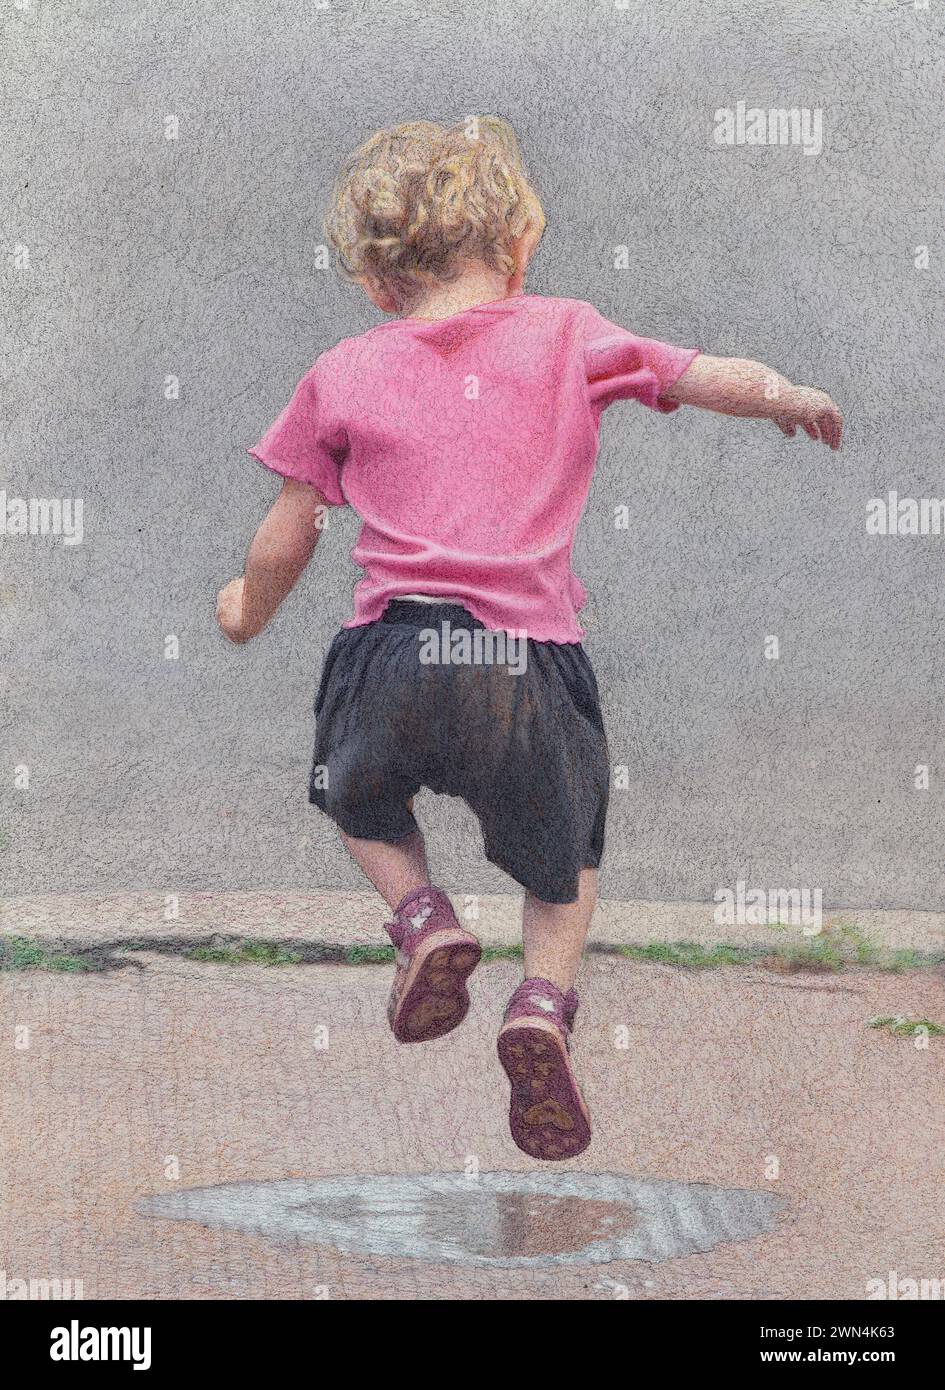 Photo illustration of a young child in a pink tee shirt and black shorts in midair, joyfully jumping over a small, rain puddle. Stock Photo